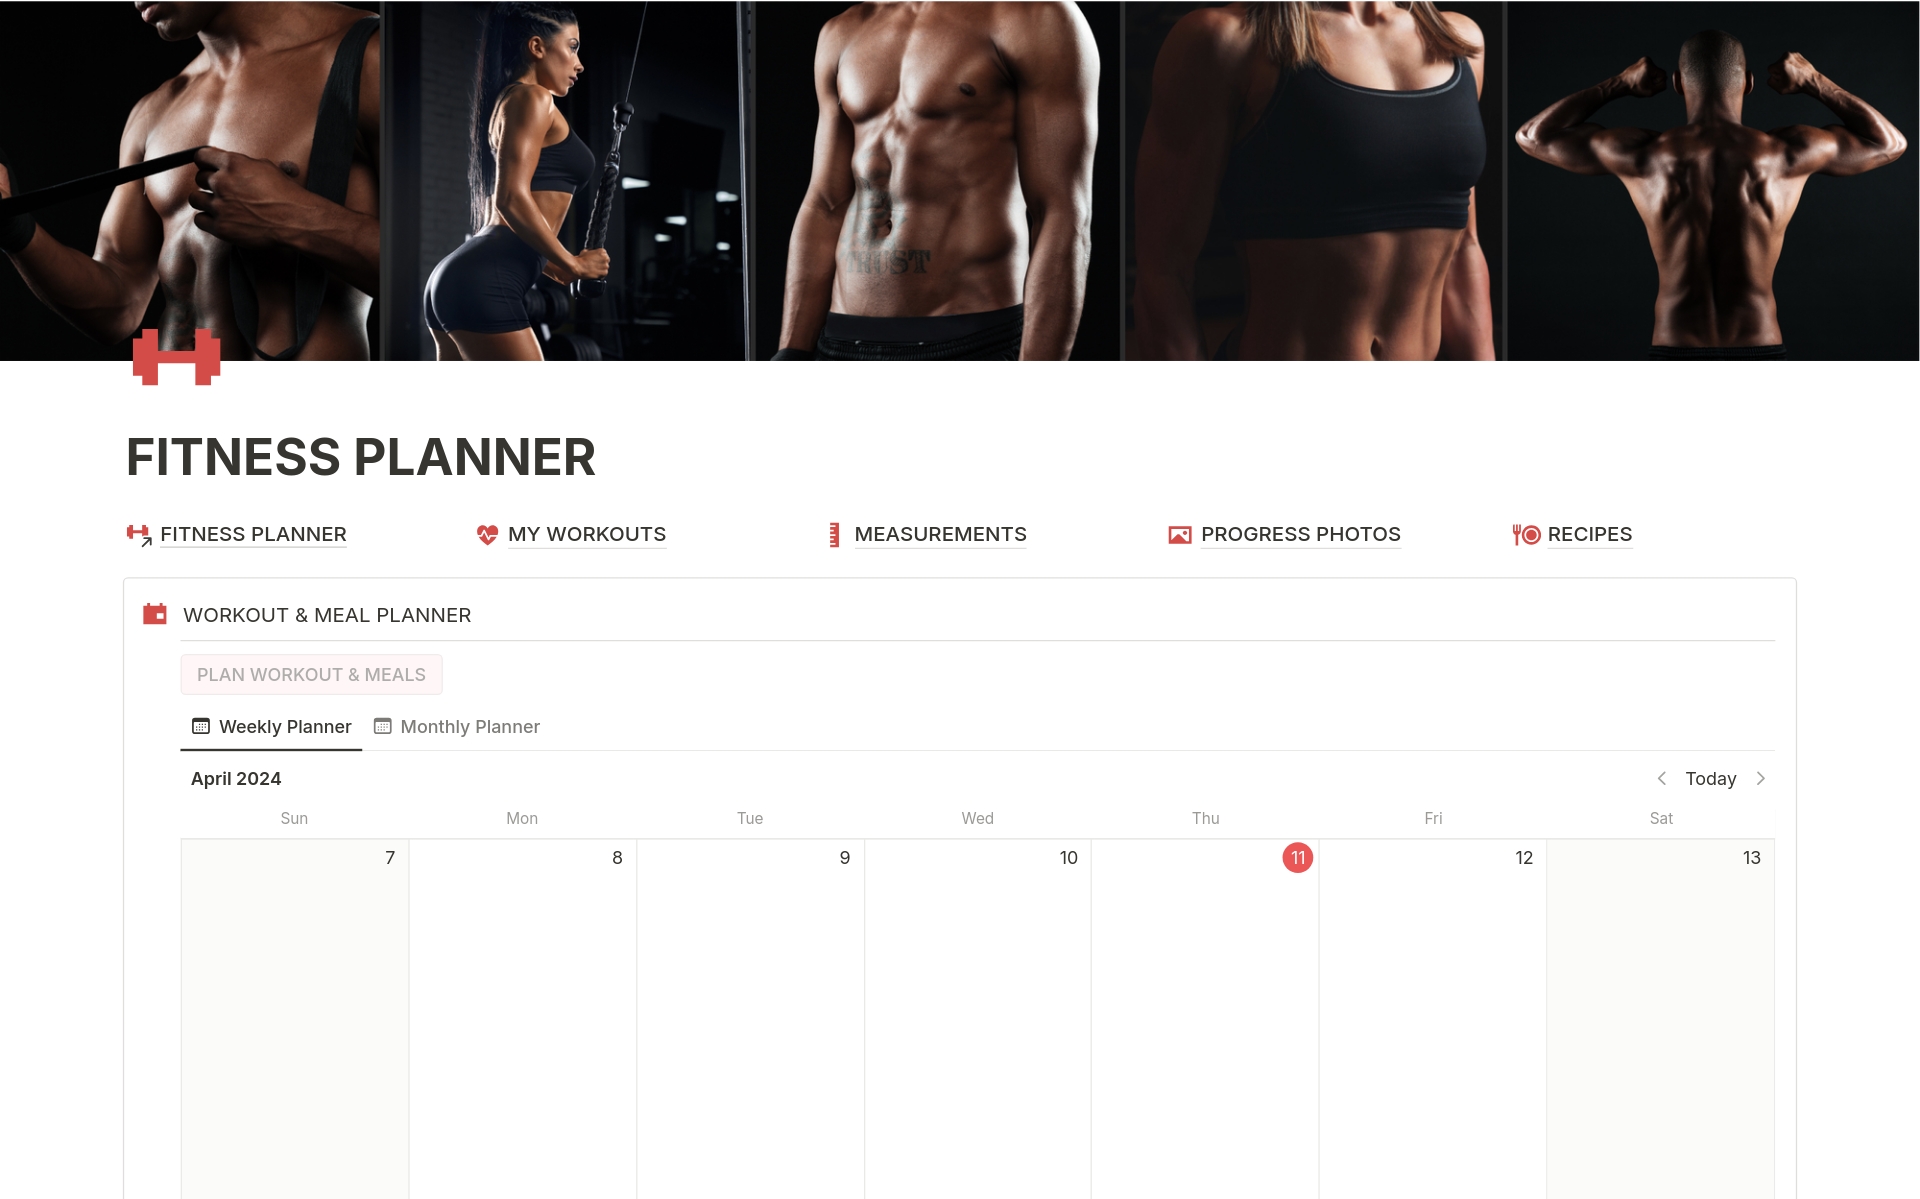 If you're tired of planners with thousands of pages, know that I understand you. Maintaining this planner won't take more than 5 minutes a day. As your personal trainer, I've included in this planner what can truly be essential for reaching your goals. 